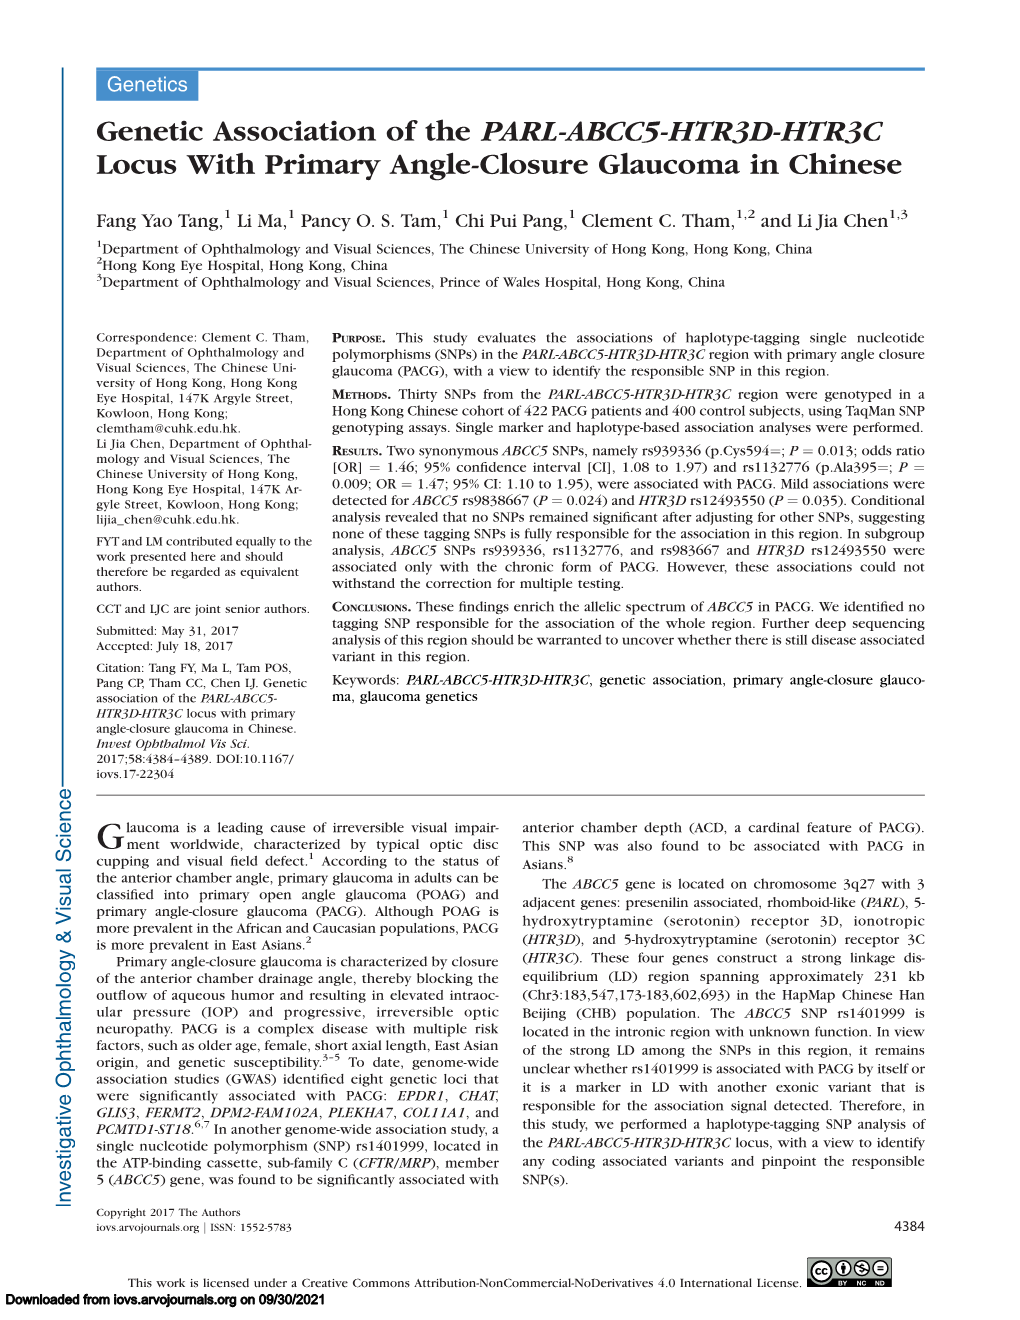 Genetic Association of the PARL-ABCC5-HTR3D-HTR3C Locus with Primary Angle-Closure Glaucoma in Chinese